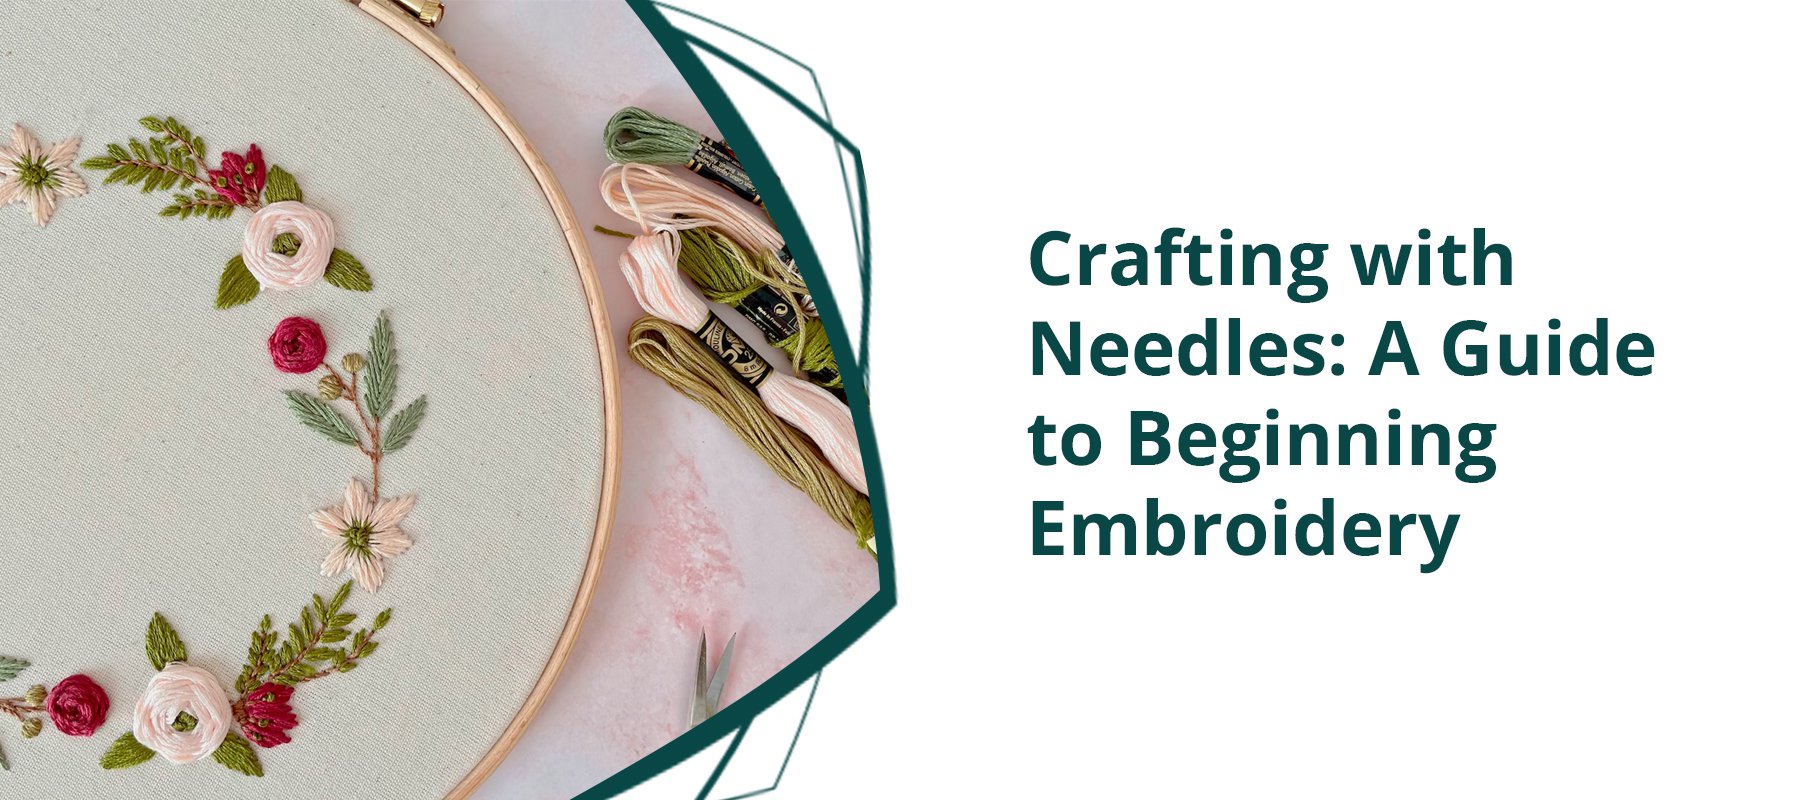 An Essential Guide to Embroidery Stitches for Beginners